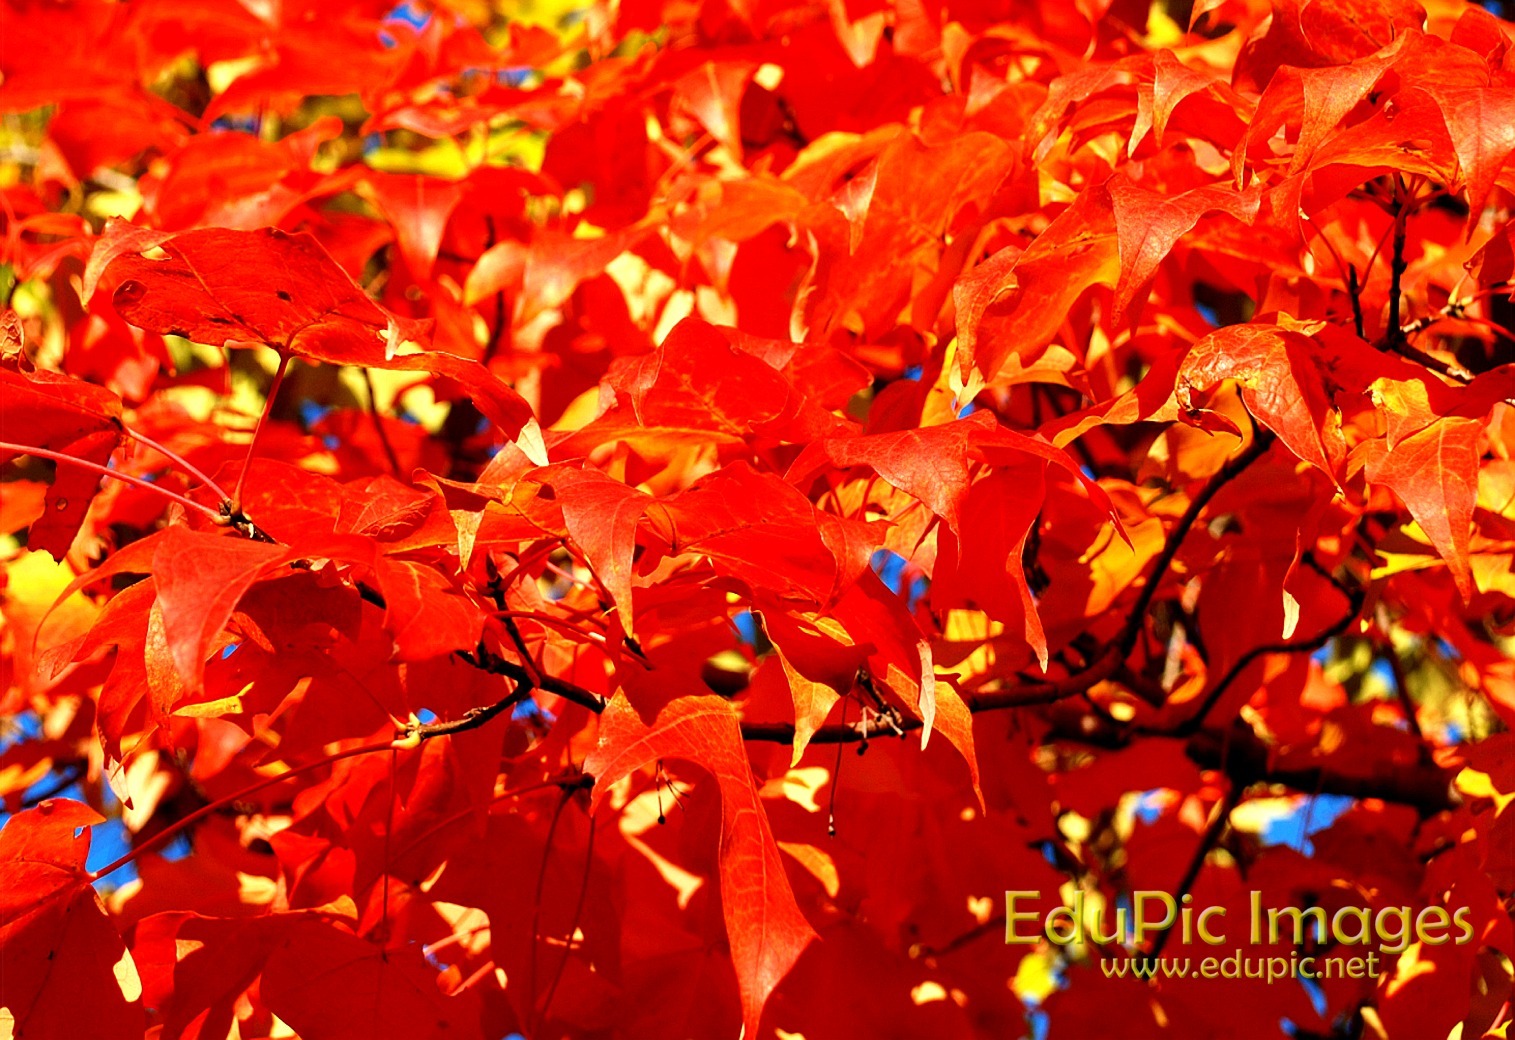 Fall Colors Desktop Wallpapers Pictures